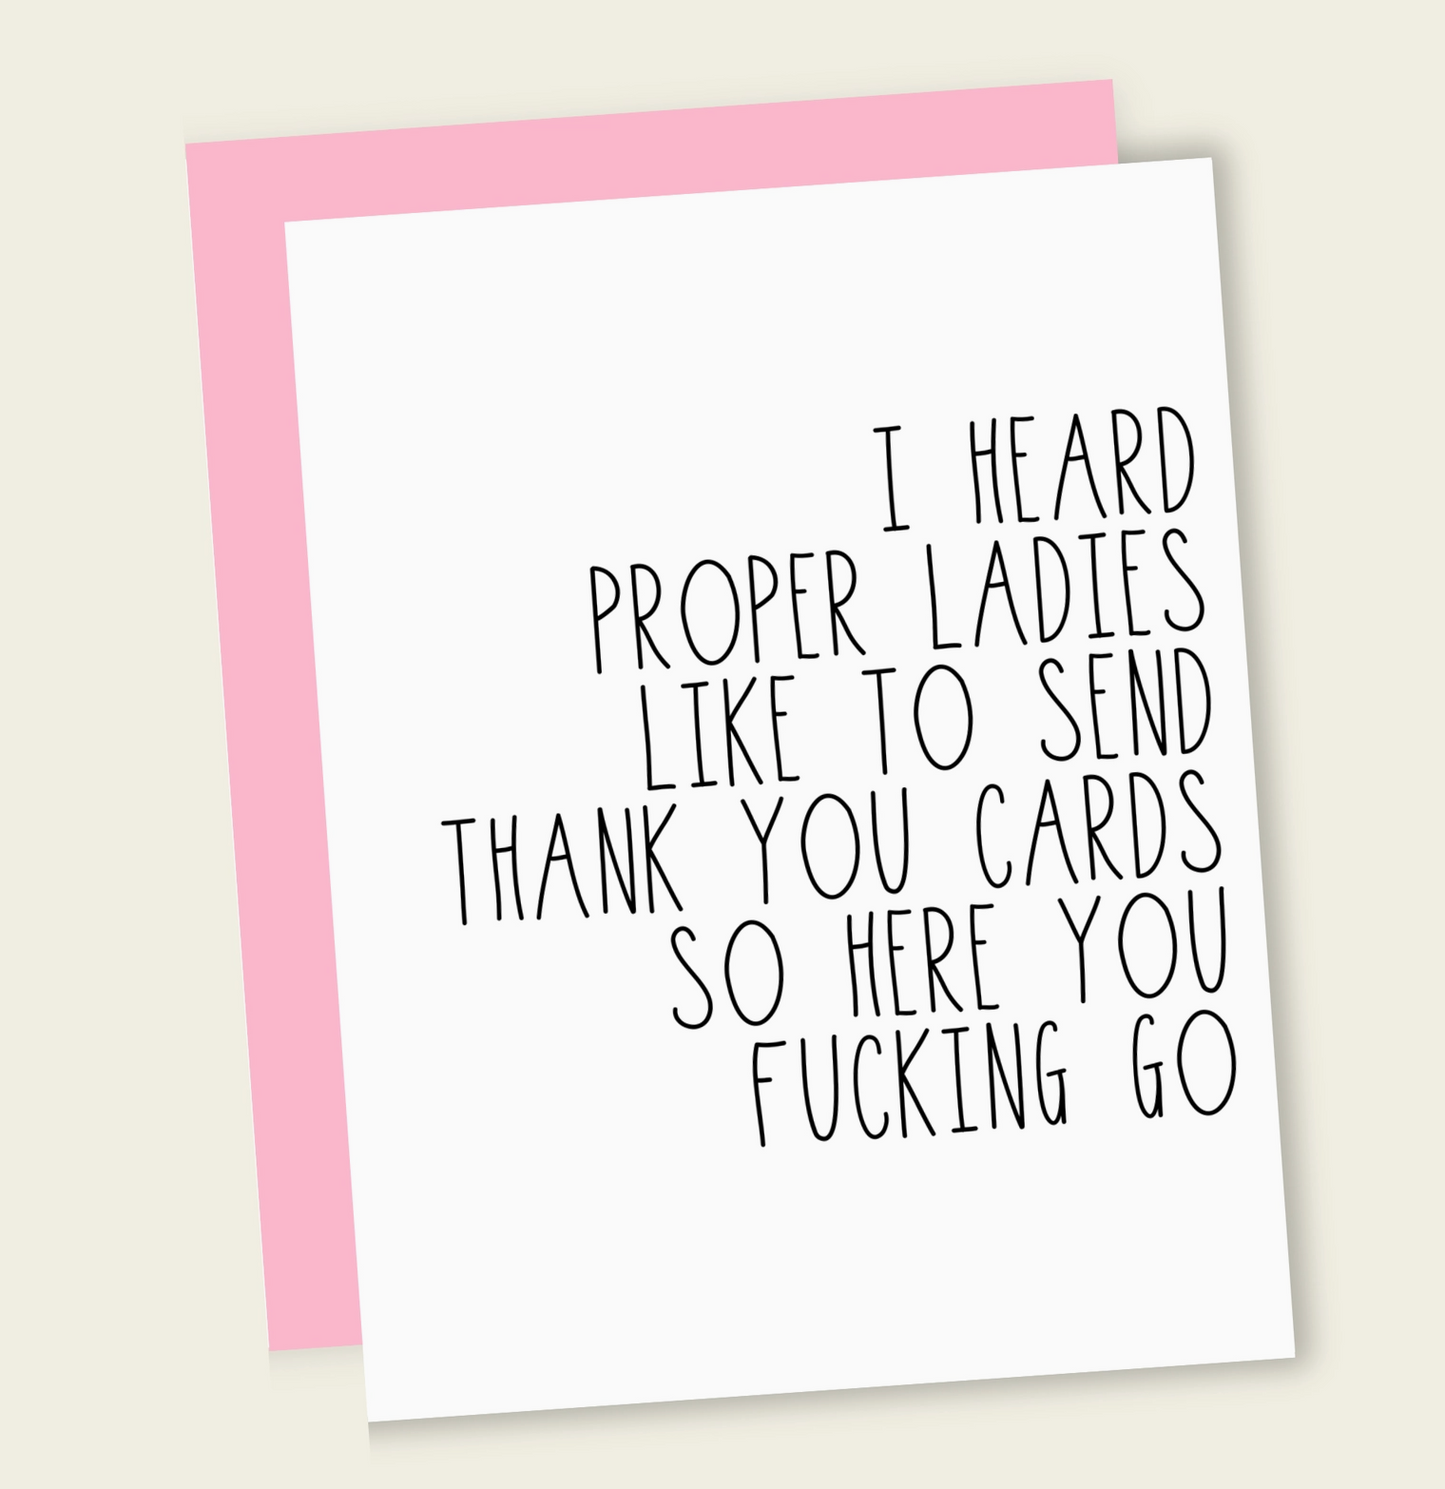 I Heard Proper Ladies Like To Send Thank You Cards So Here You F*cking Go Card